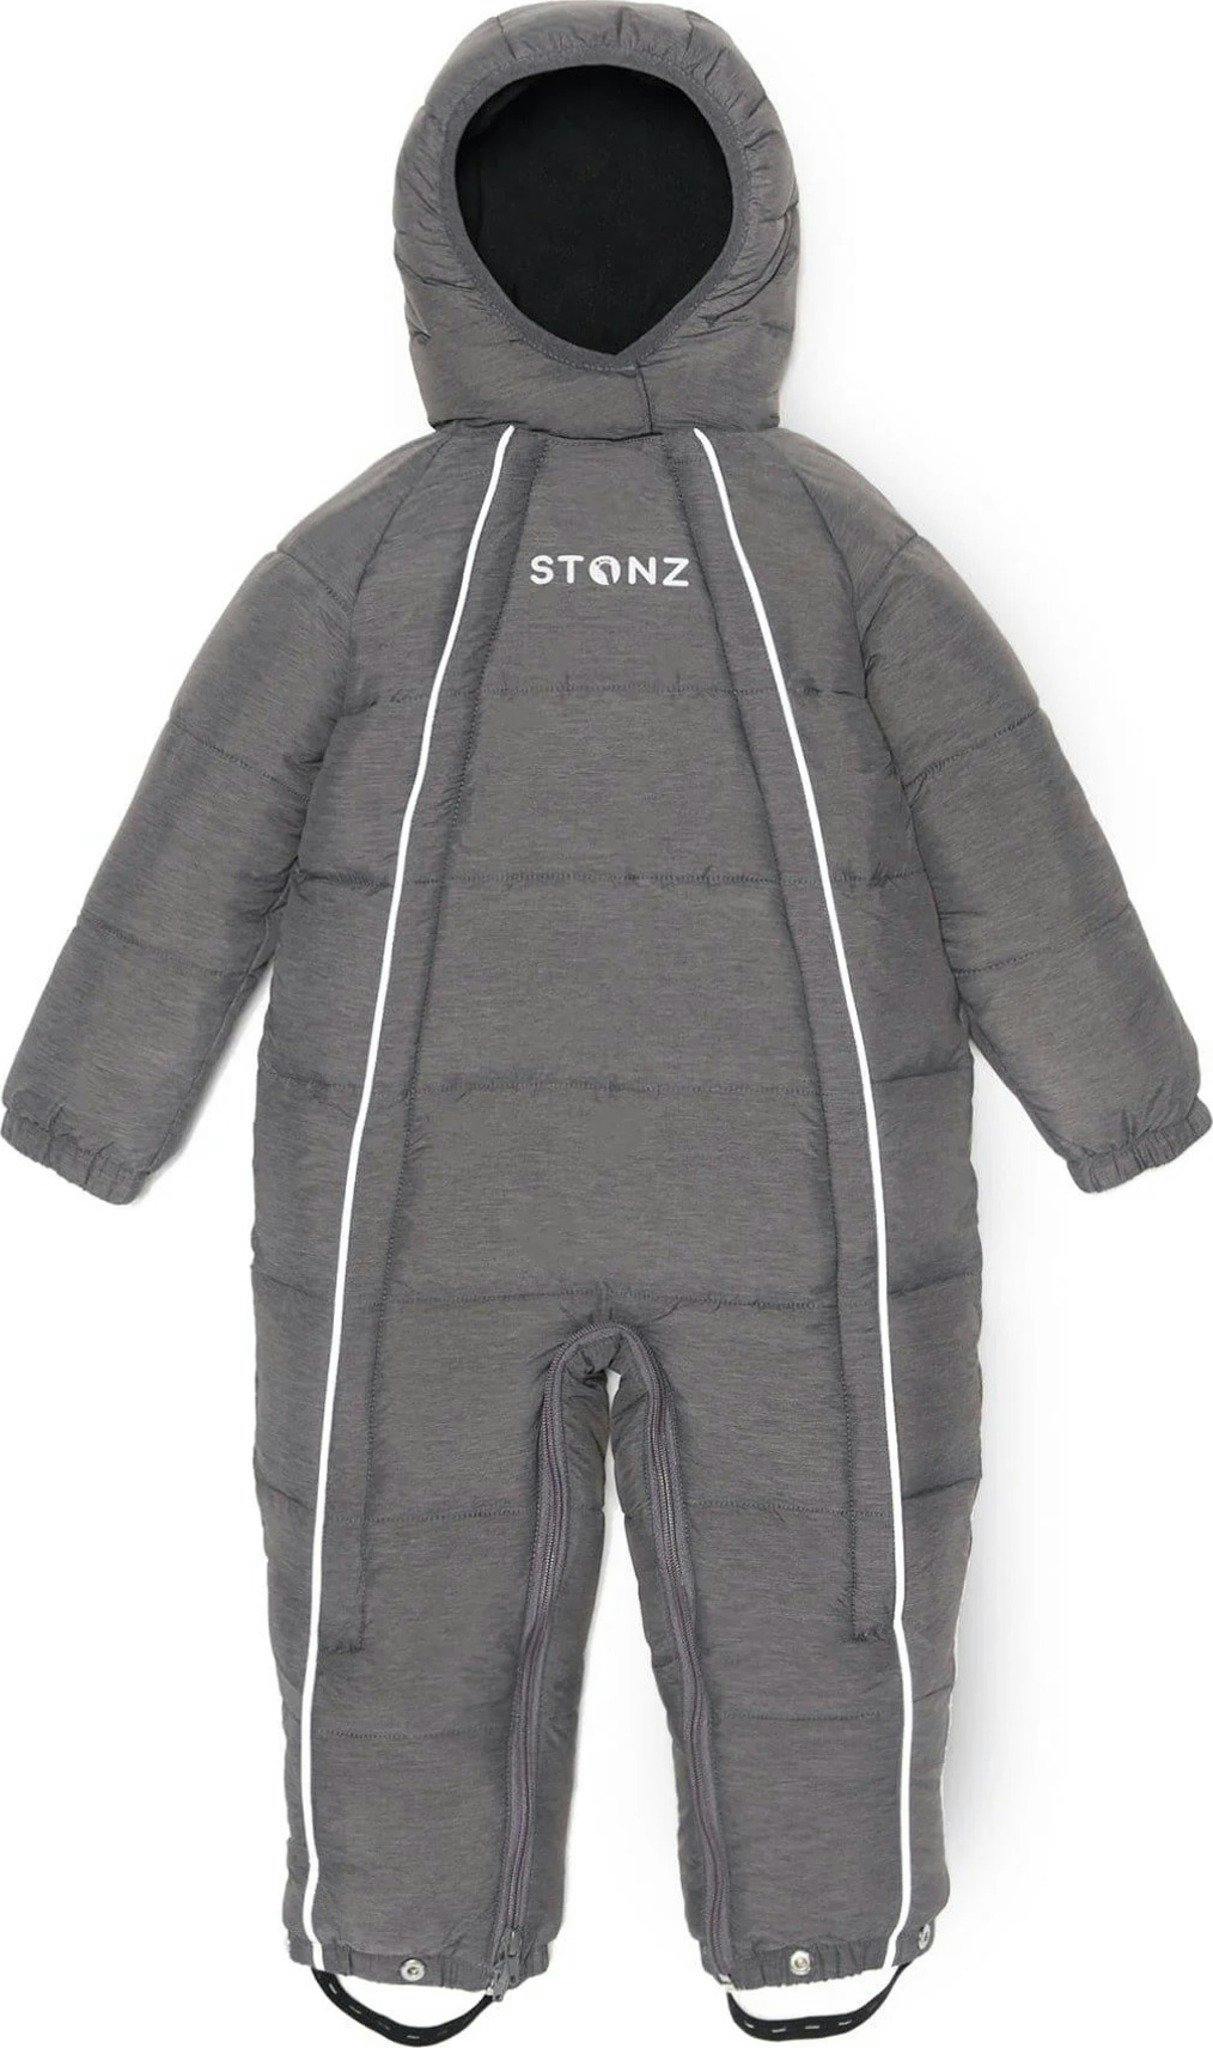 Product image for Snow Suit - Baby